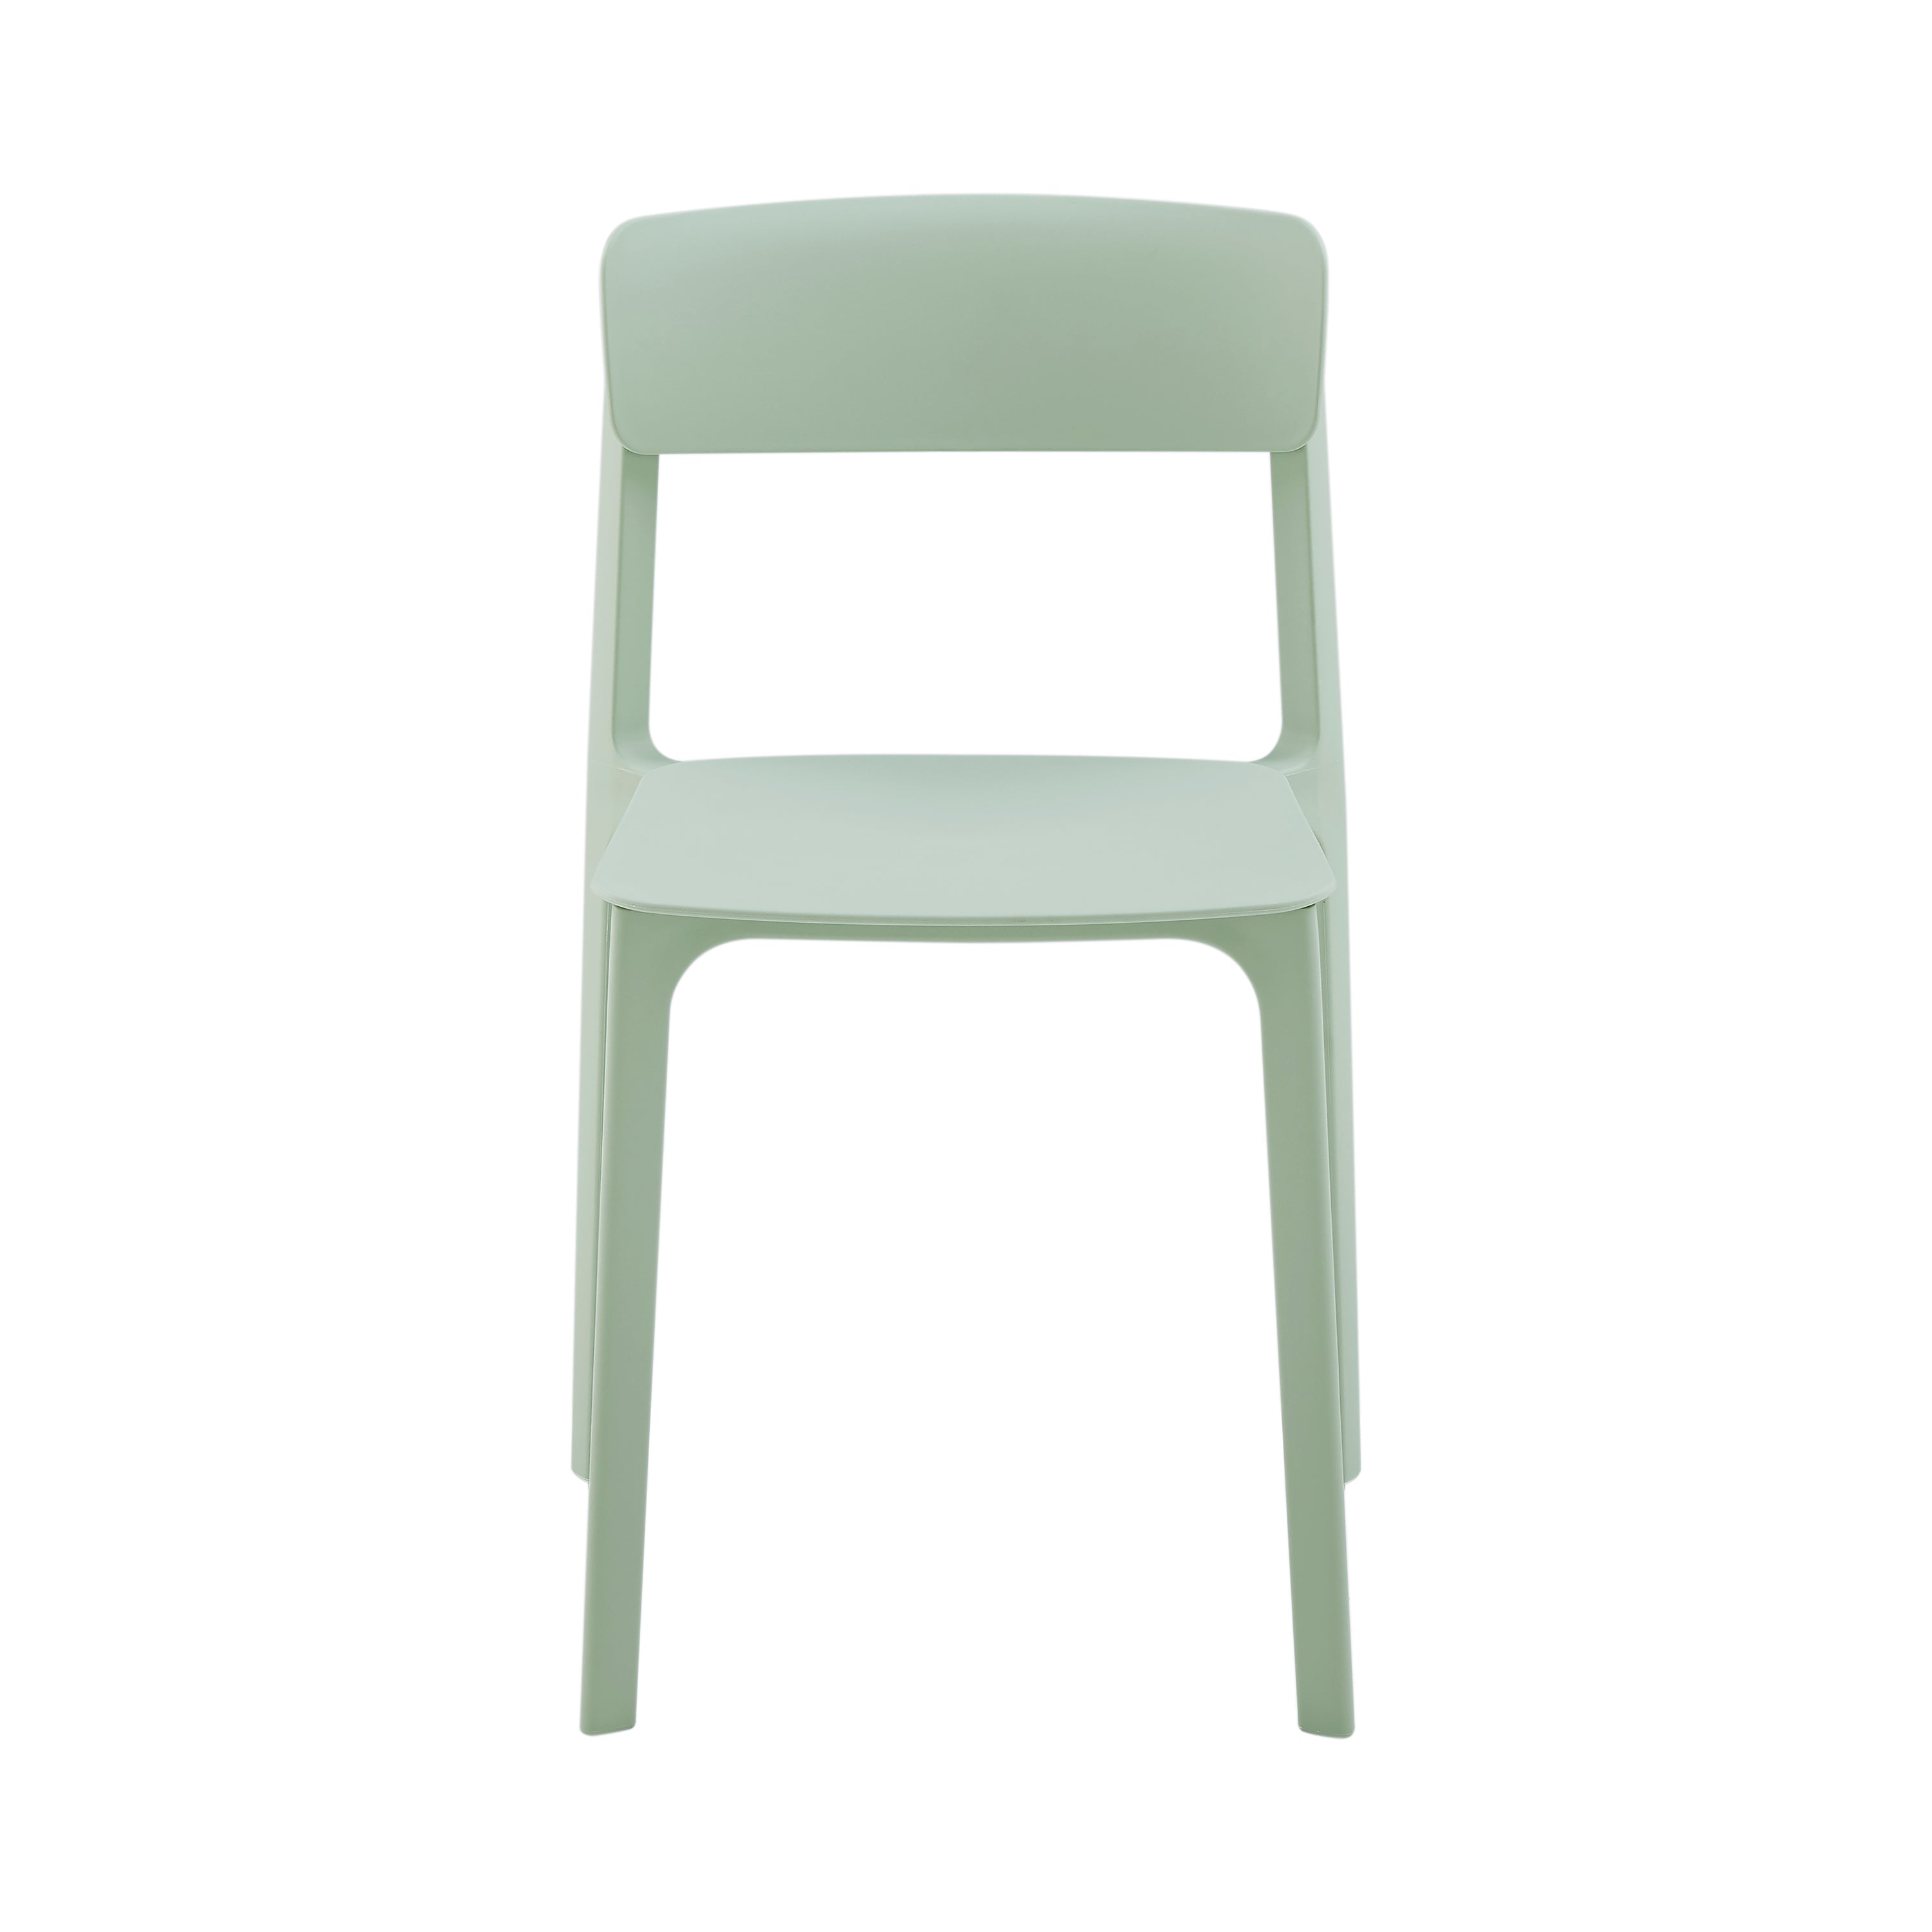 Euro Style Dining Chairs - Tibo Stackable Side Chair in Mint Polypropylene - Set of 2